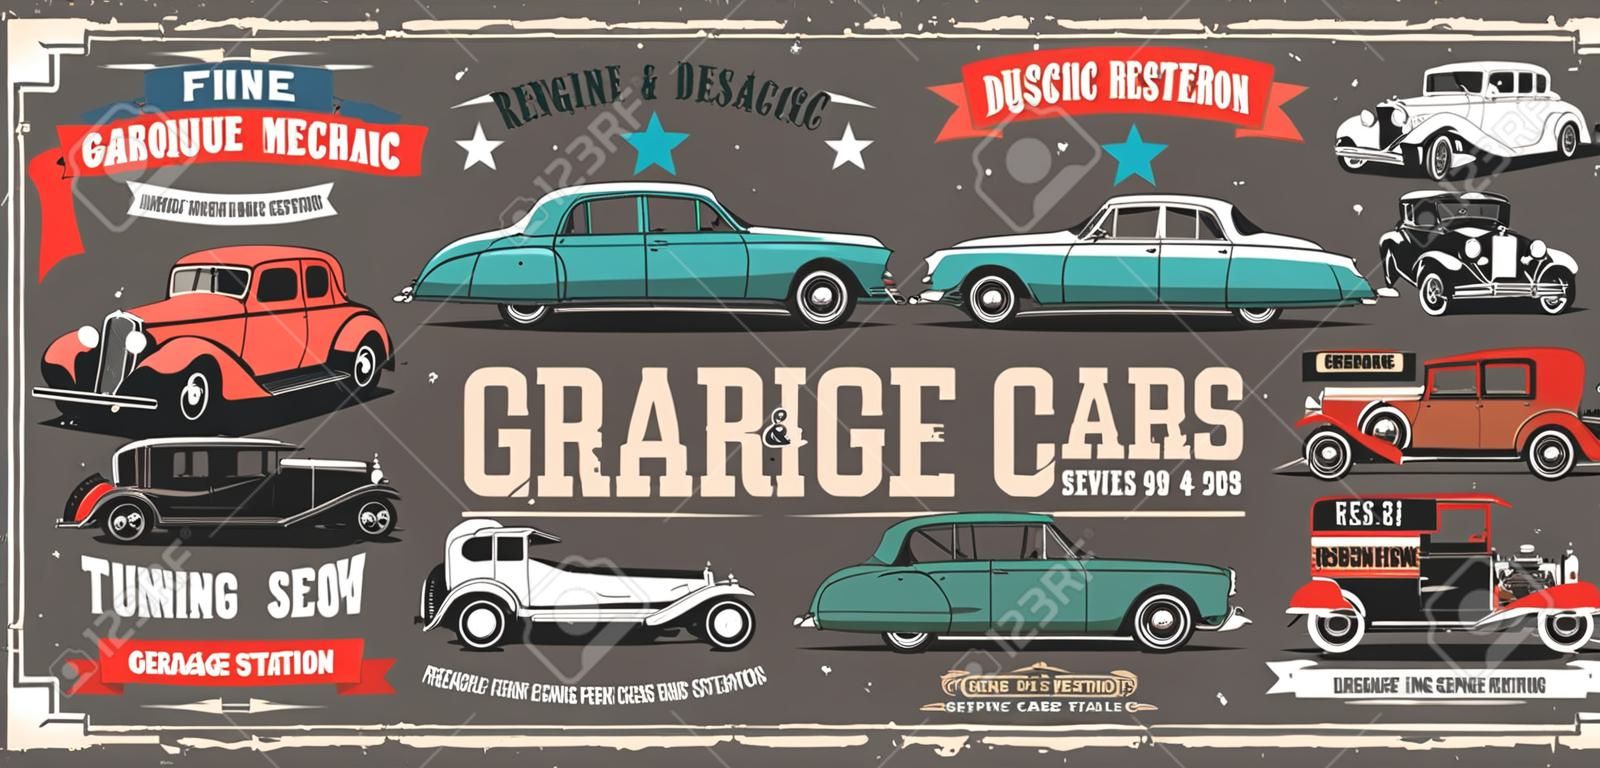 Retro cars, vintage old vehicle tuning and garage station service. Vector rarity and antique motor cars show, repair and diagnostic center, engine and chassis restoration mechanic garage